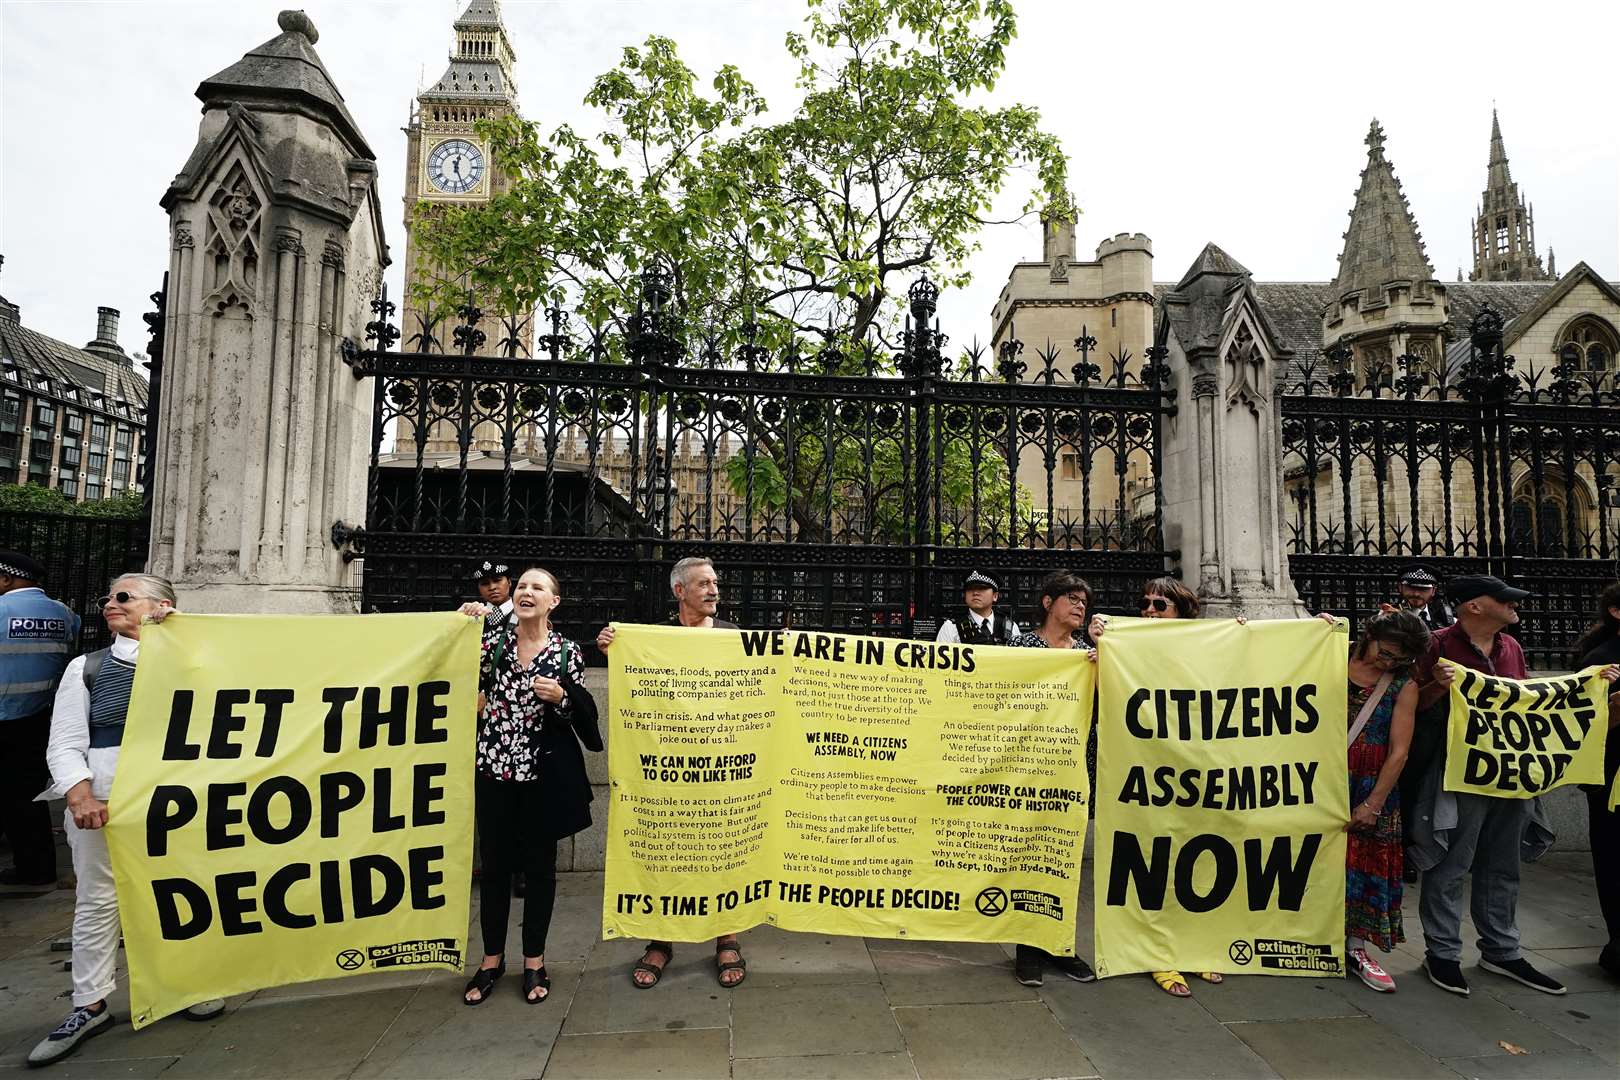 Extinction Rebellion protesters outside the Houses of Parliament, calling for a citizens’ assembly (Aaron Chown/PA)